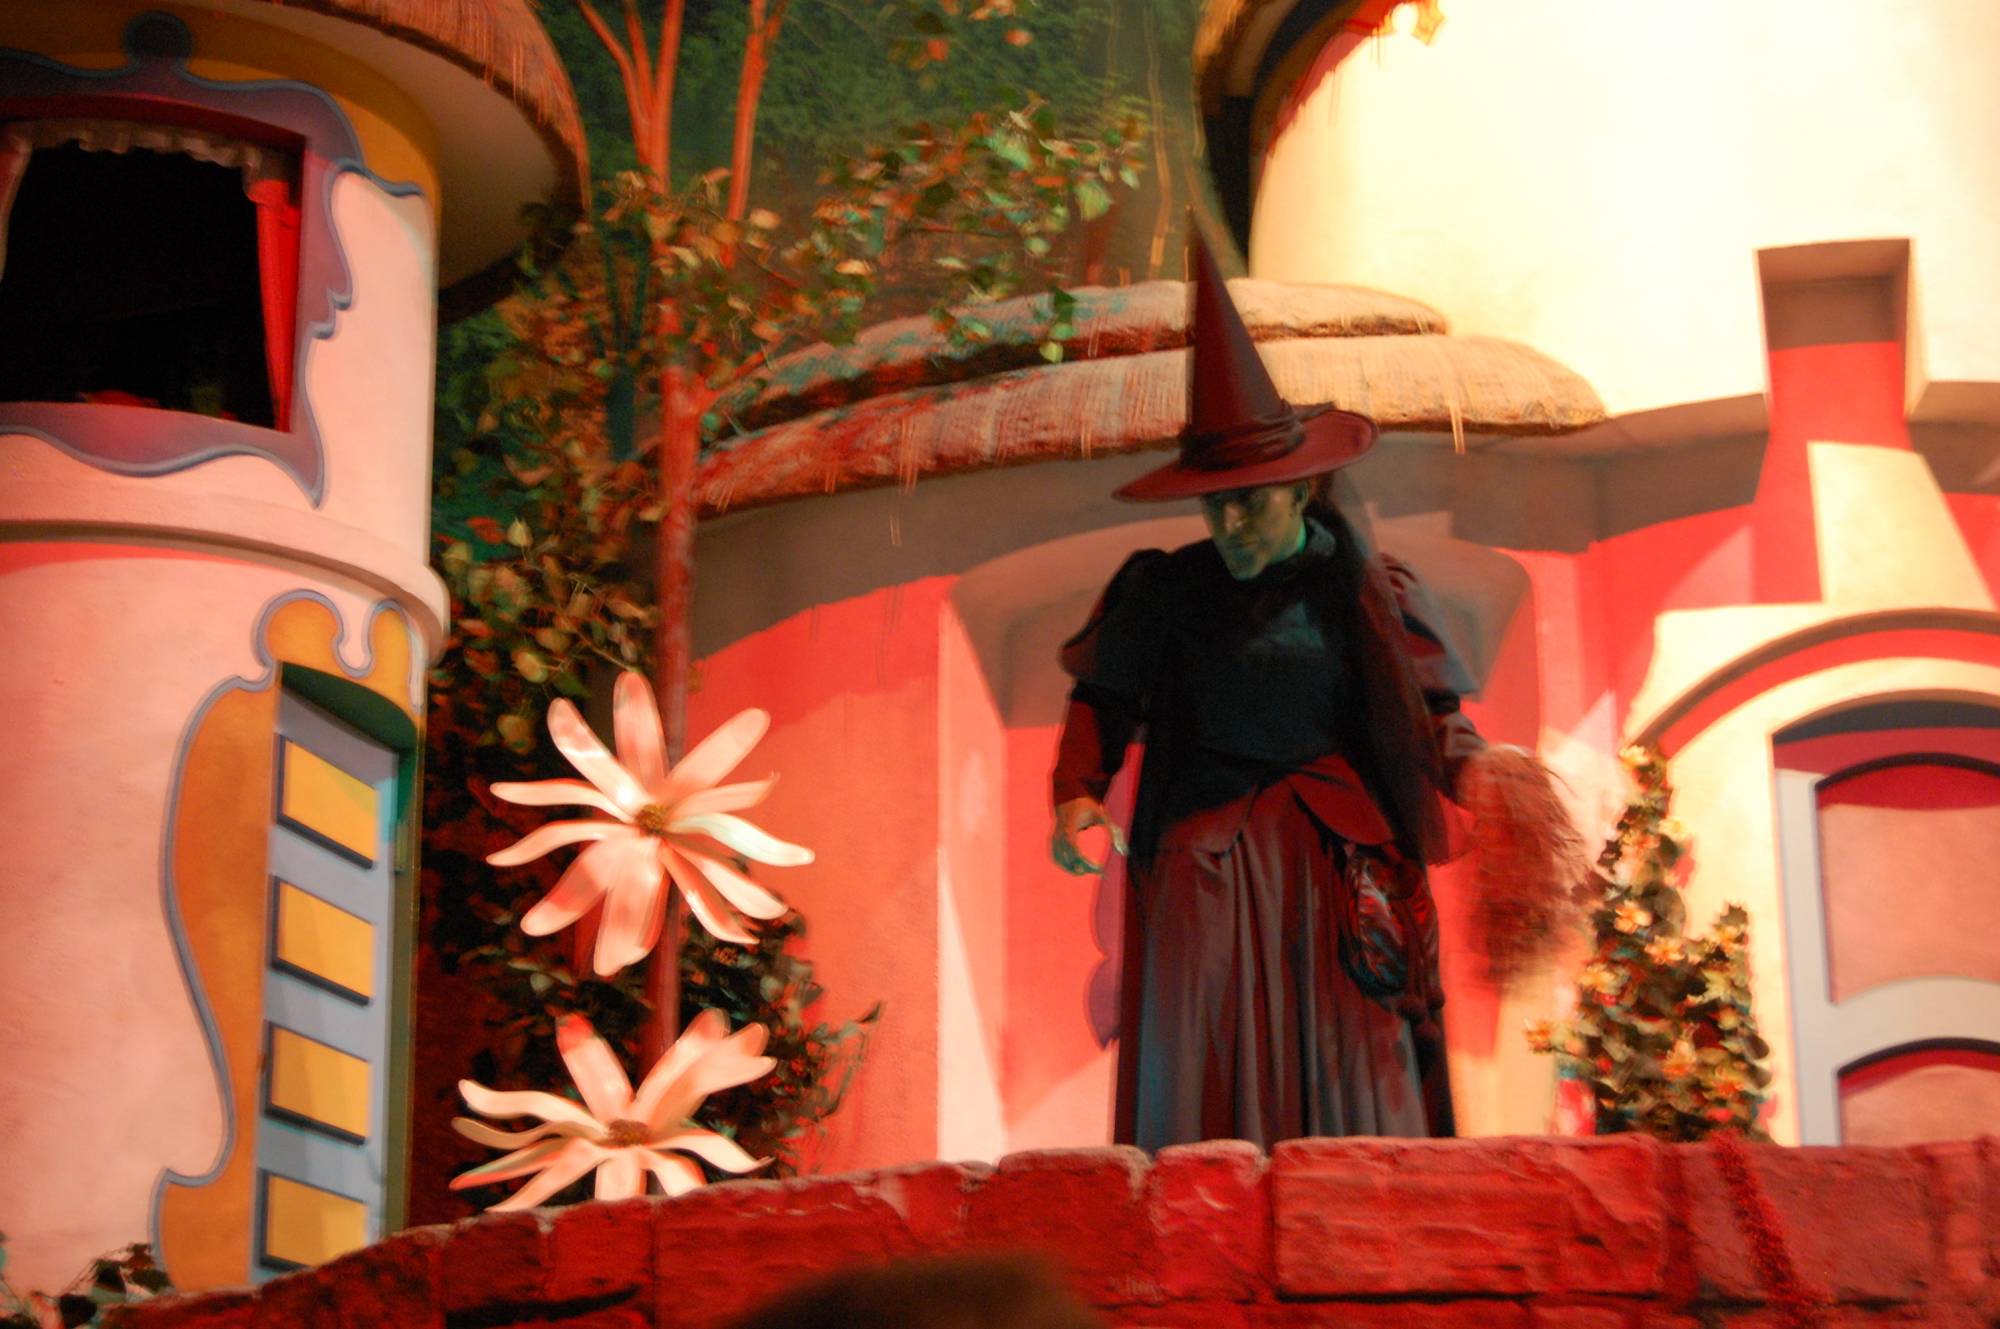 DHS: Hollywood Boulevard: Great Movie Ride: Wicked Witch